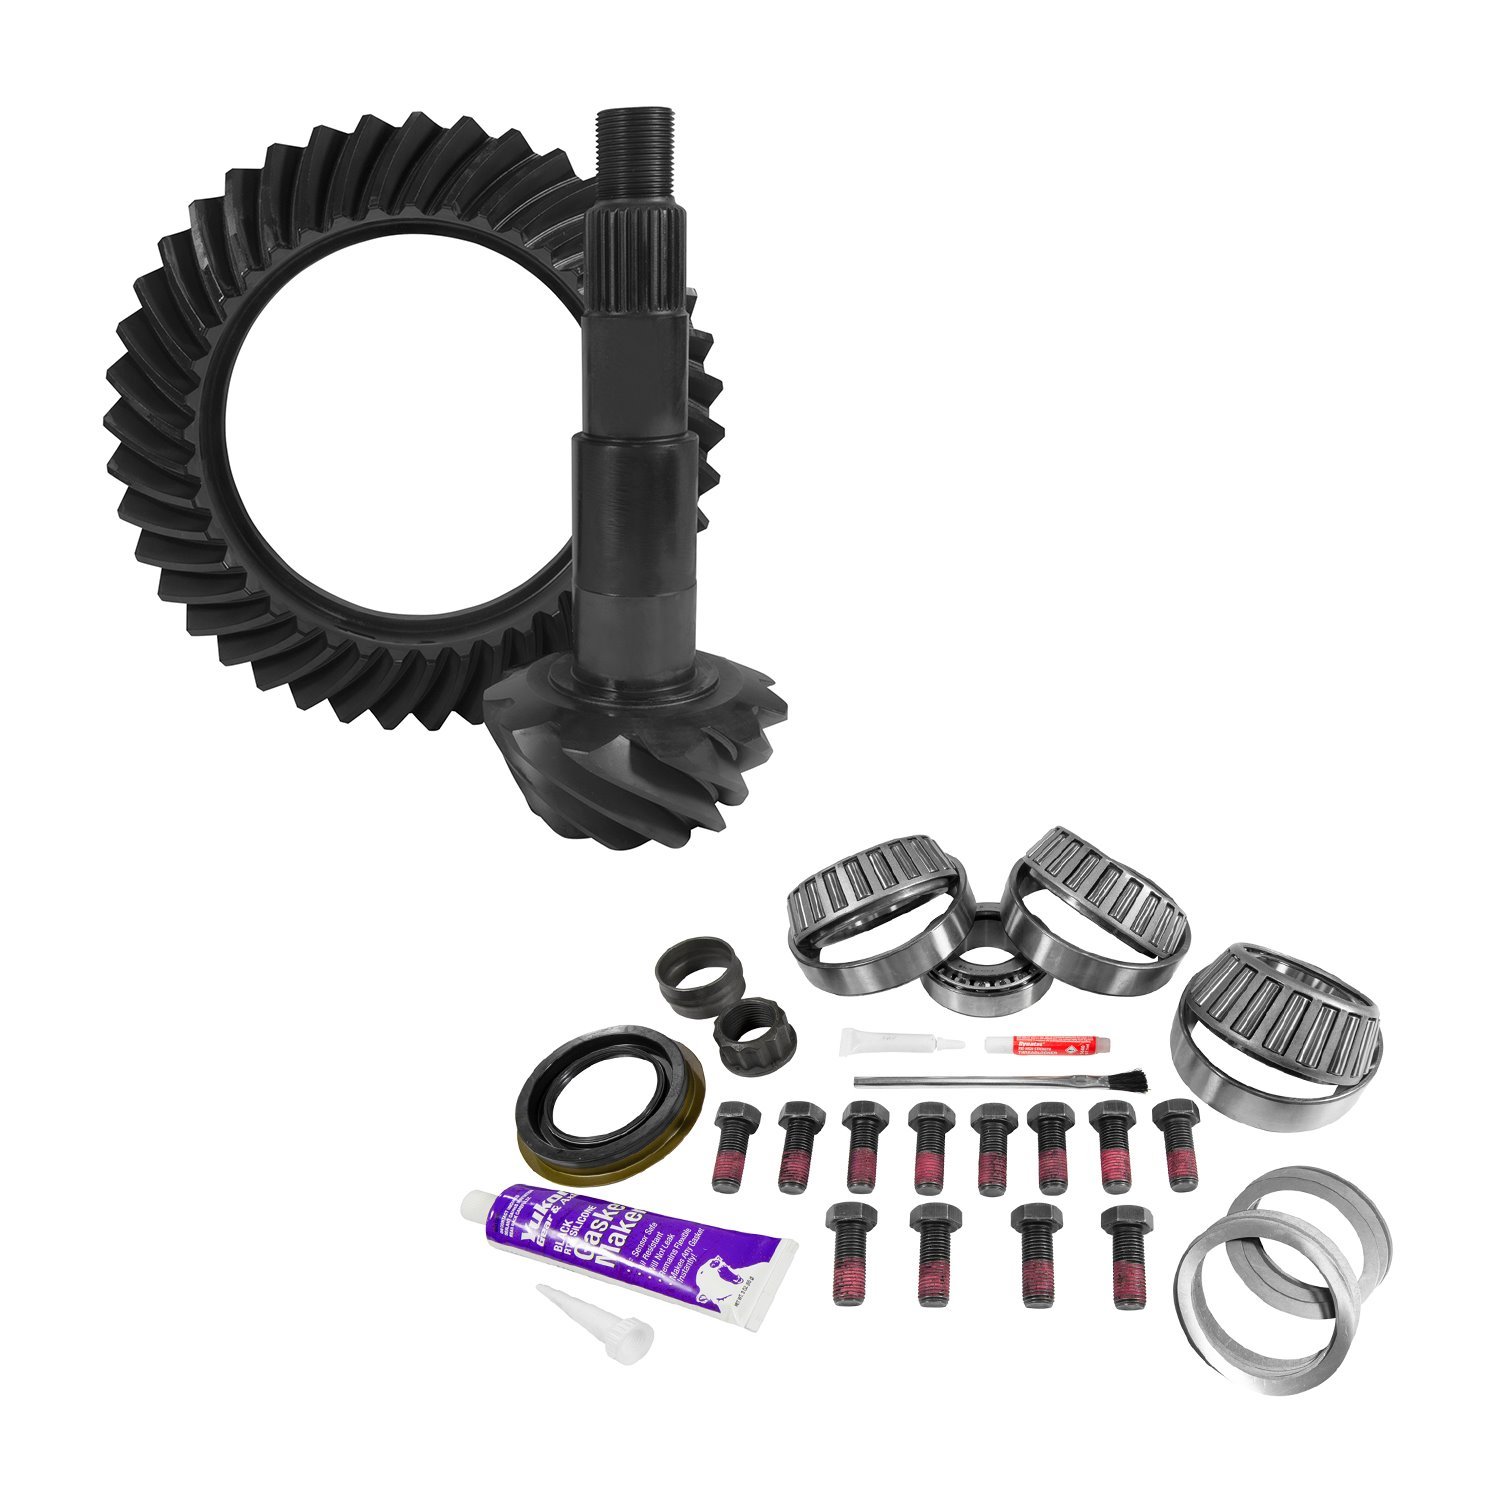 USA Standard 10821 11.5 in. Aam 4.56 Rear Ring & Pinion Install Kit, 4.125 in. Od Pinion Bearing